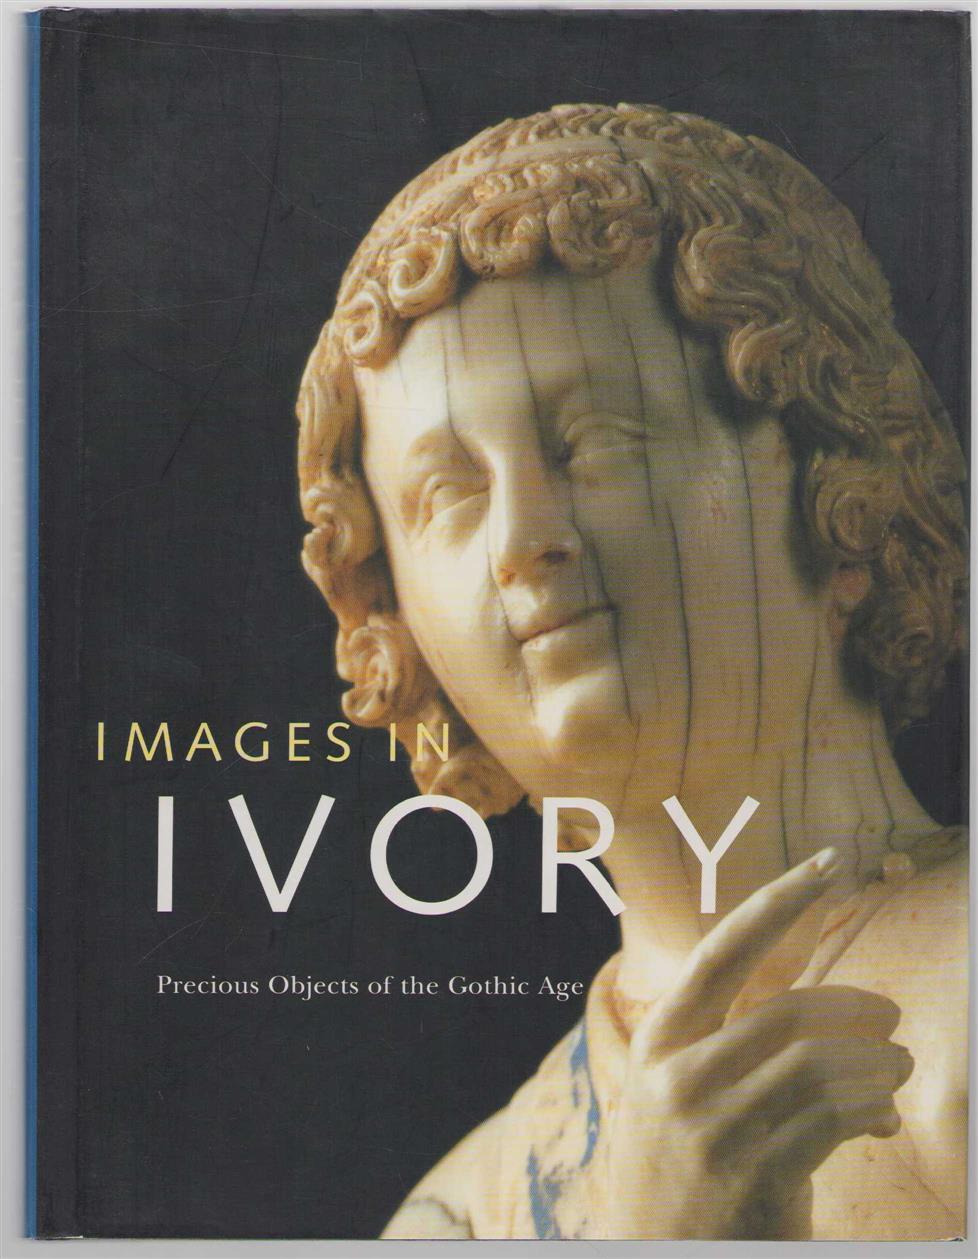 Images in ivory : precious objects of the Gothic age - The Detroit Institute of Arts (Detroit, Mich.)